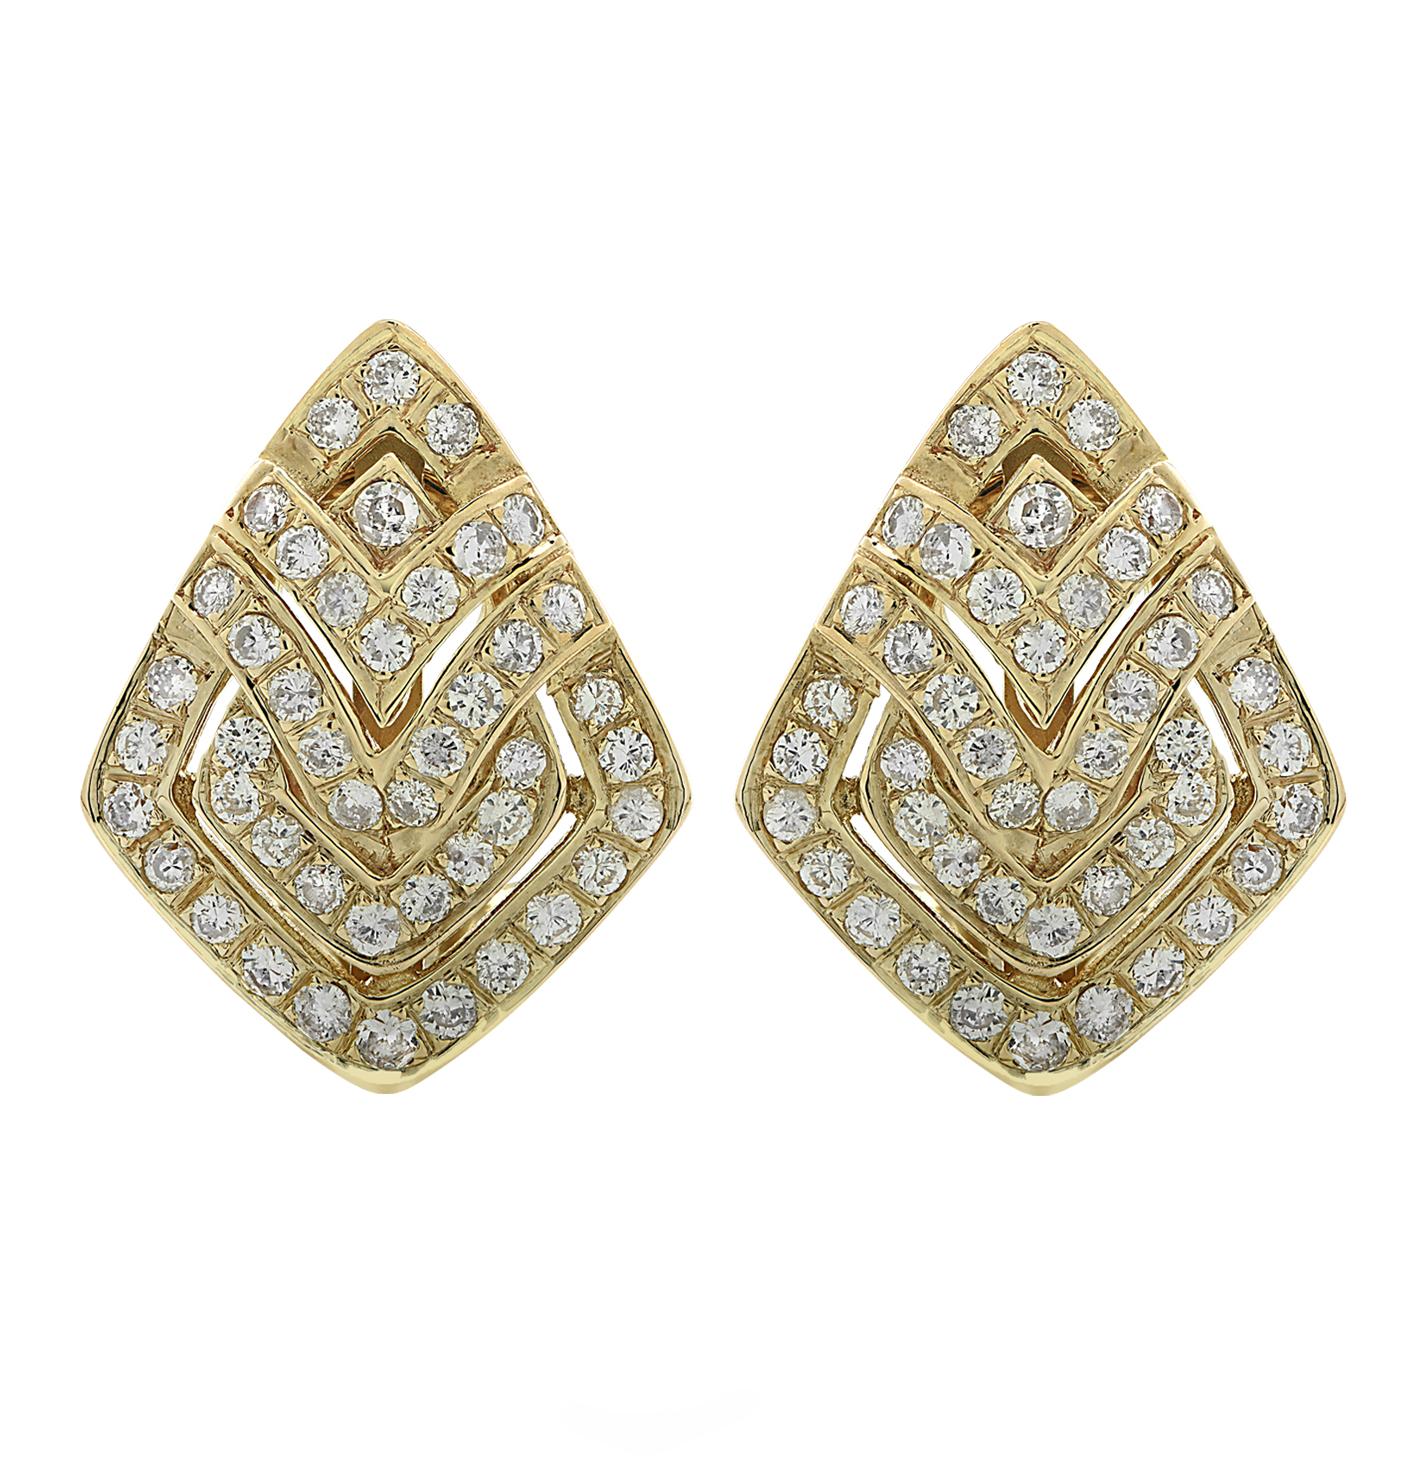 Gorgeous earrings crafted in yellow gold, featuring 92 round brilliant cut diamonds weighing approximately 2 carats total, G color, SI clarity. The diamonds are set in a striking open metal work design with stunning geometric patterns. The earrings